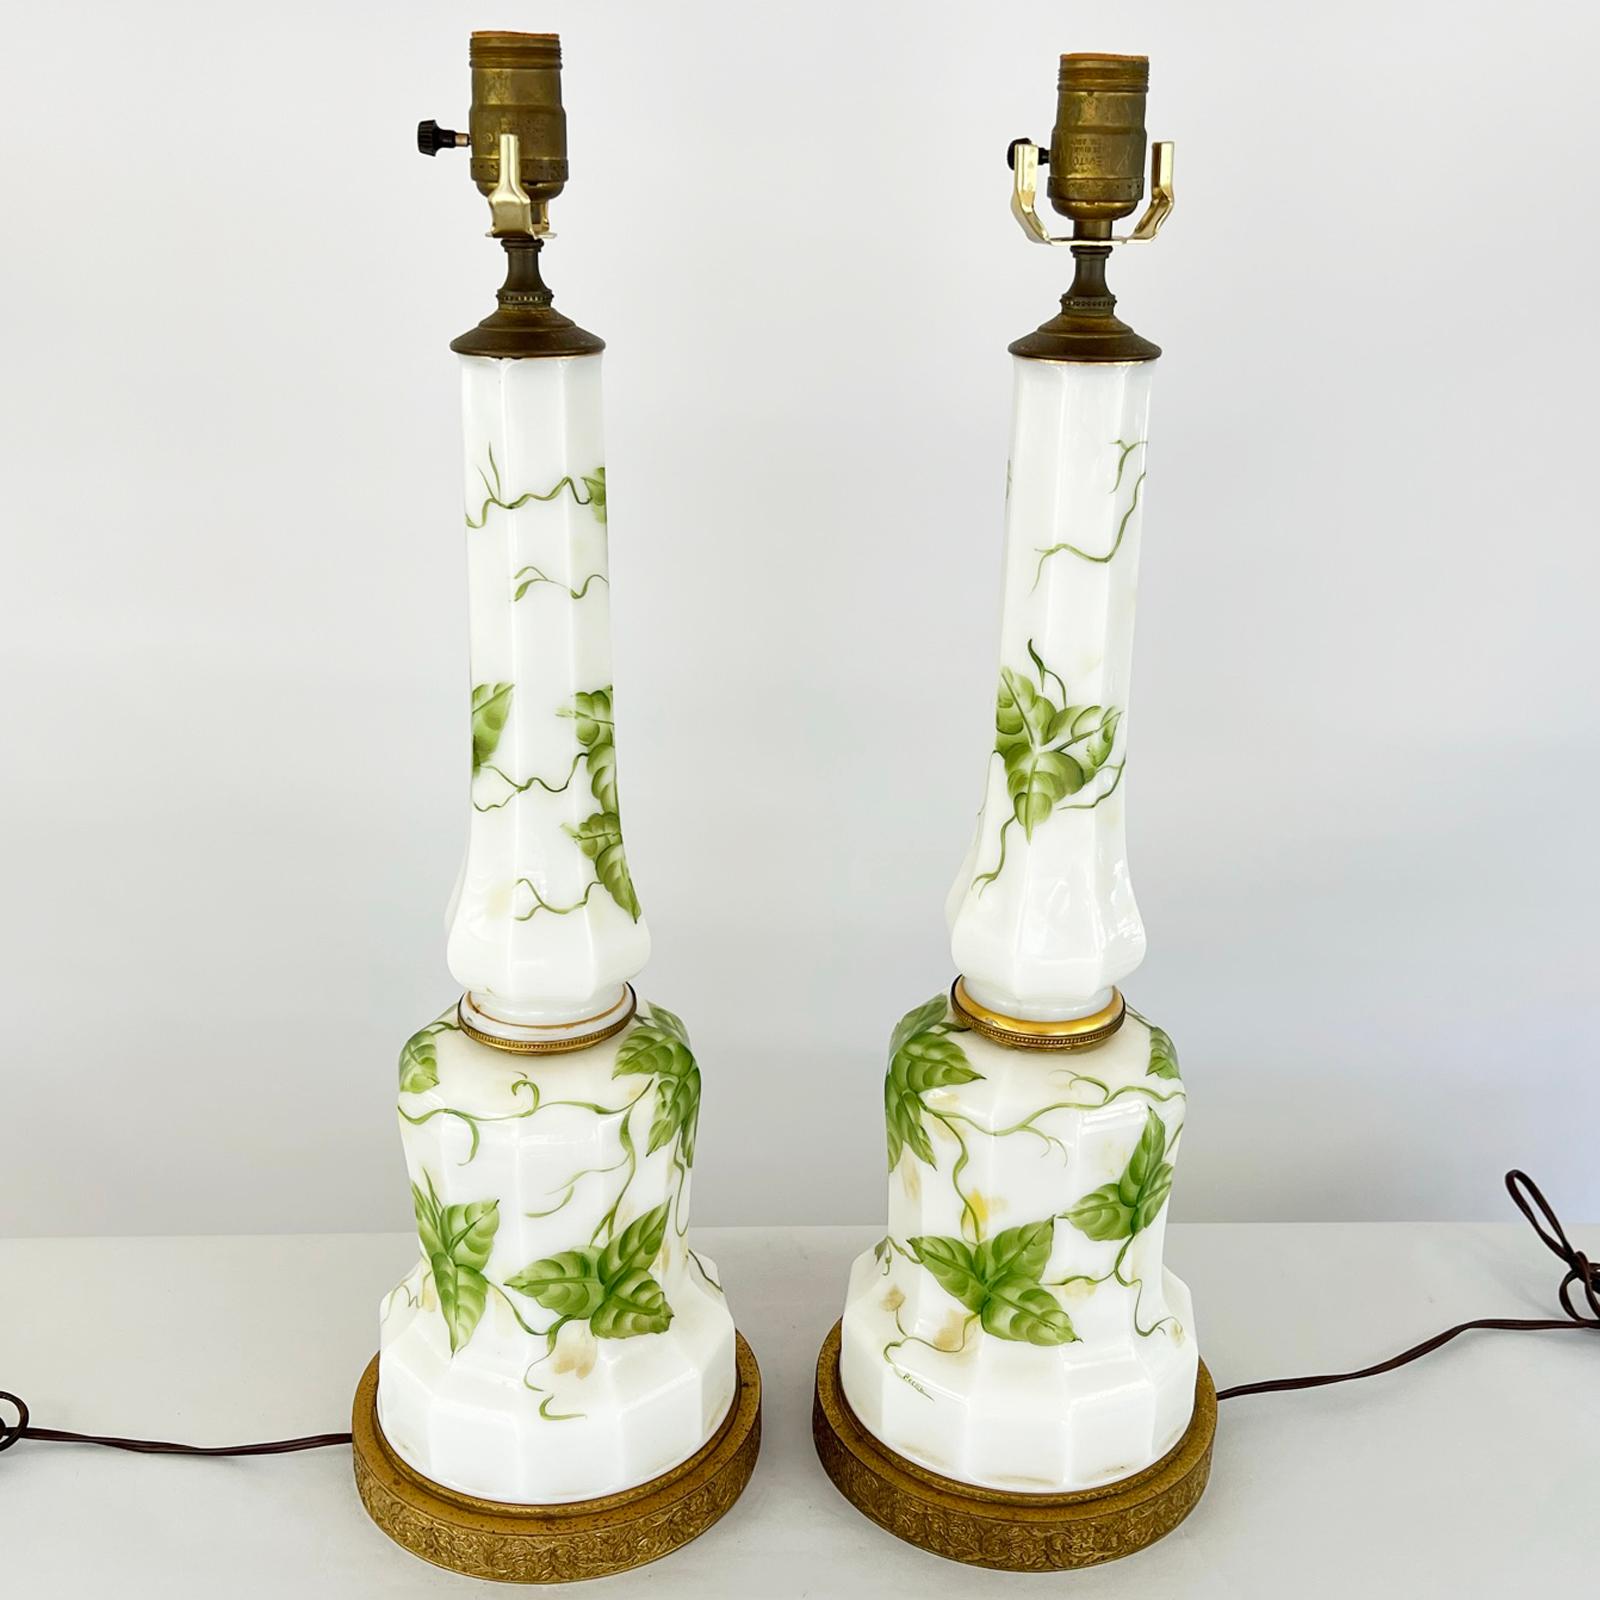 Pair of columnar table lamps, in Empire style, of milkglass. Each a round, faceted column, handpainted with scrolling vines of ivy. Lamped on round, pierced metal bases. Signed, 